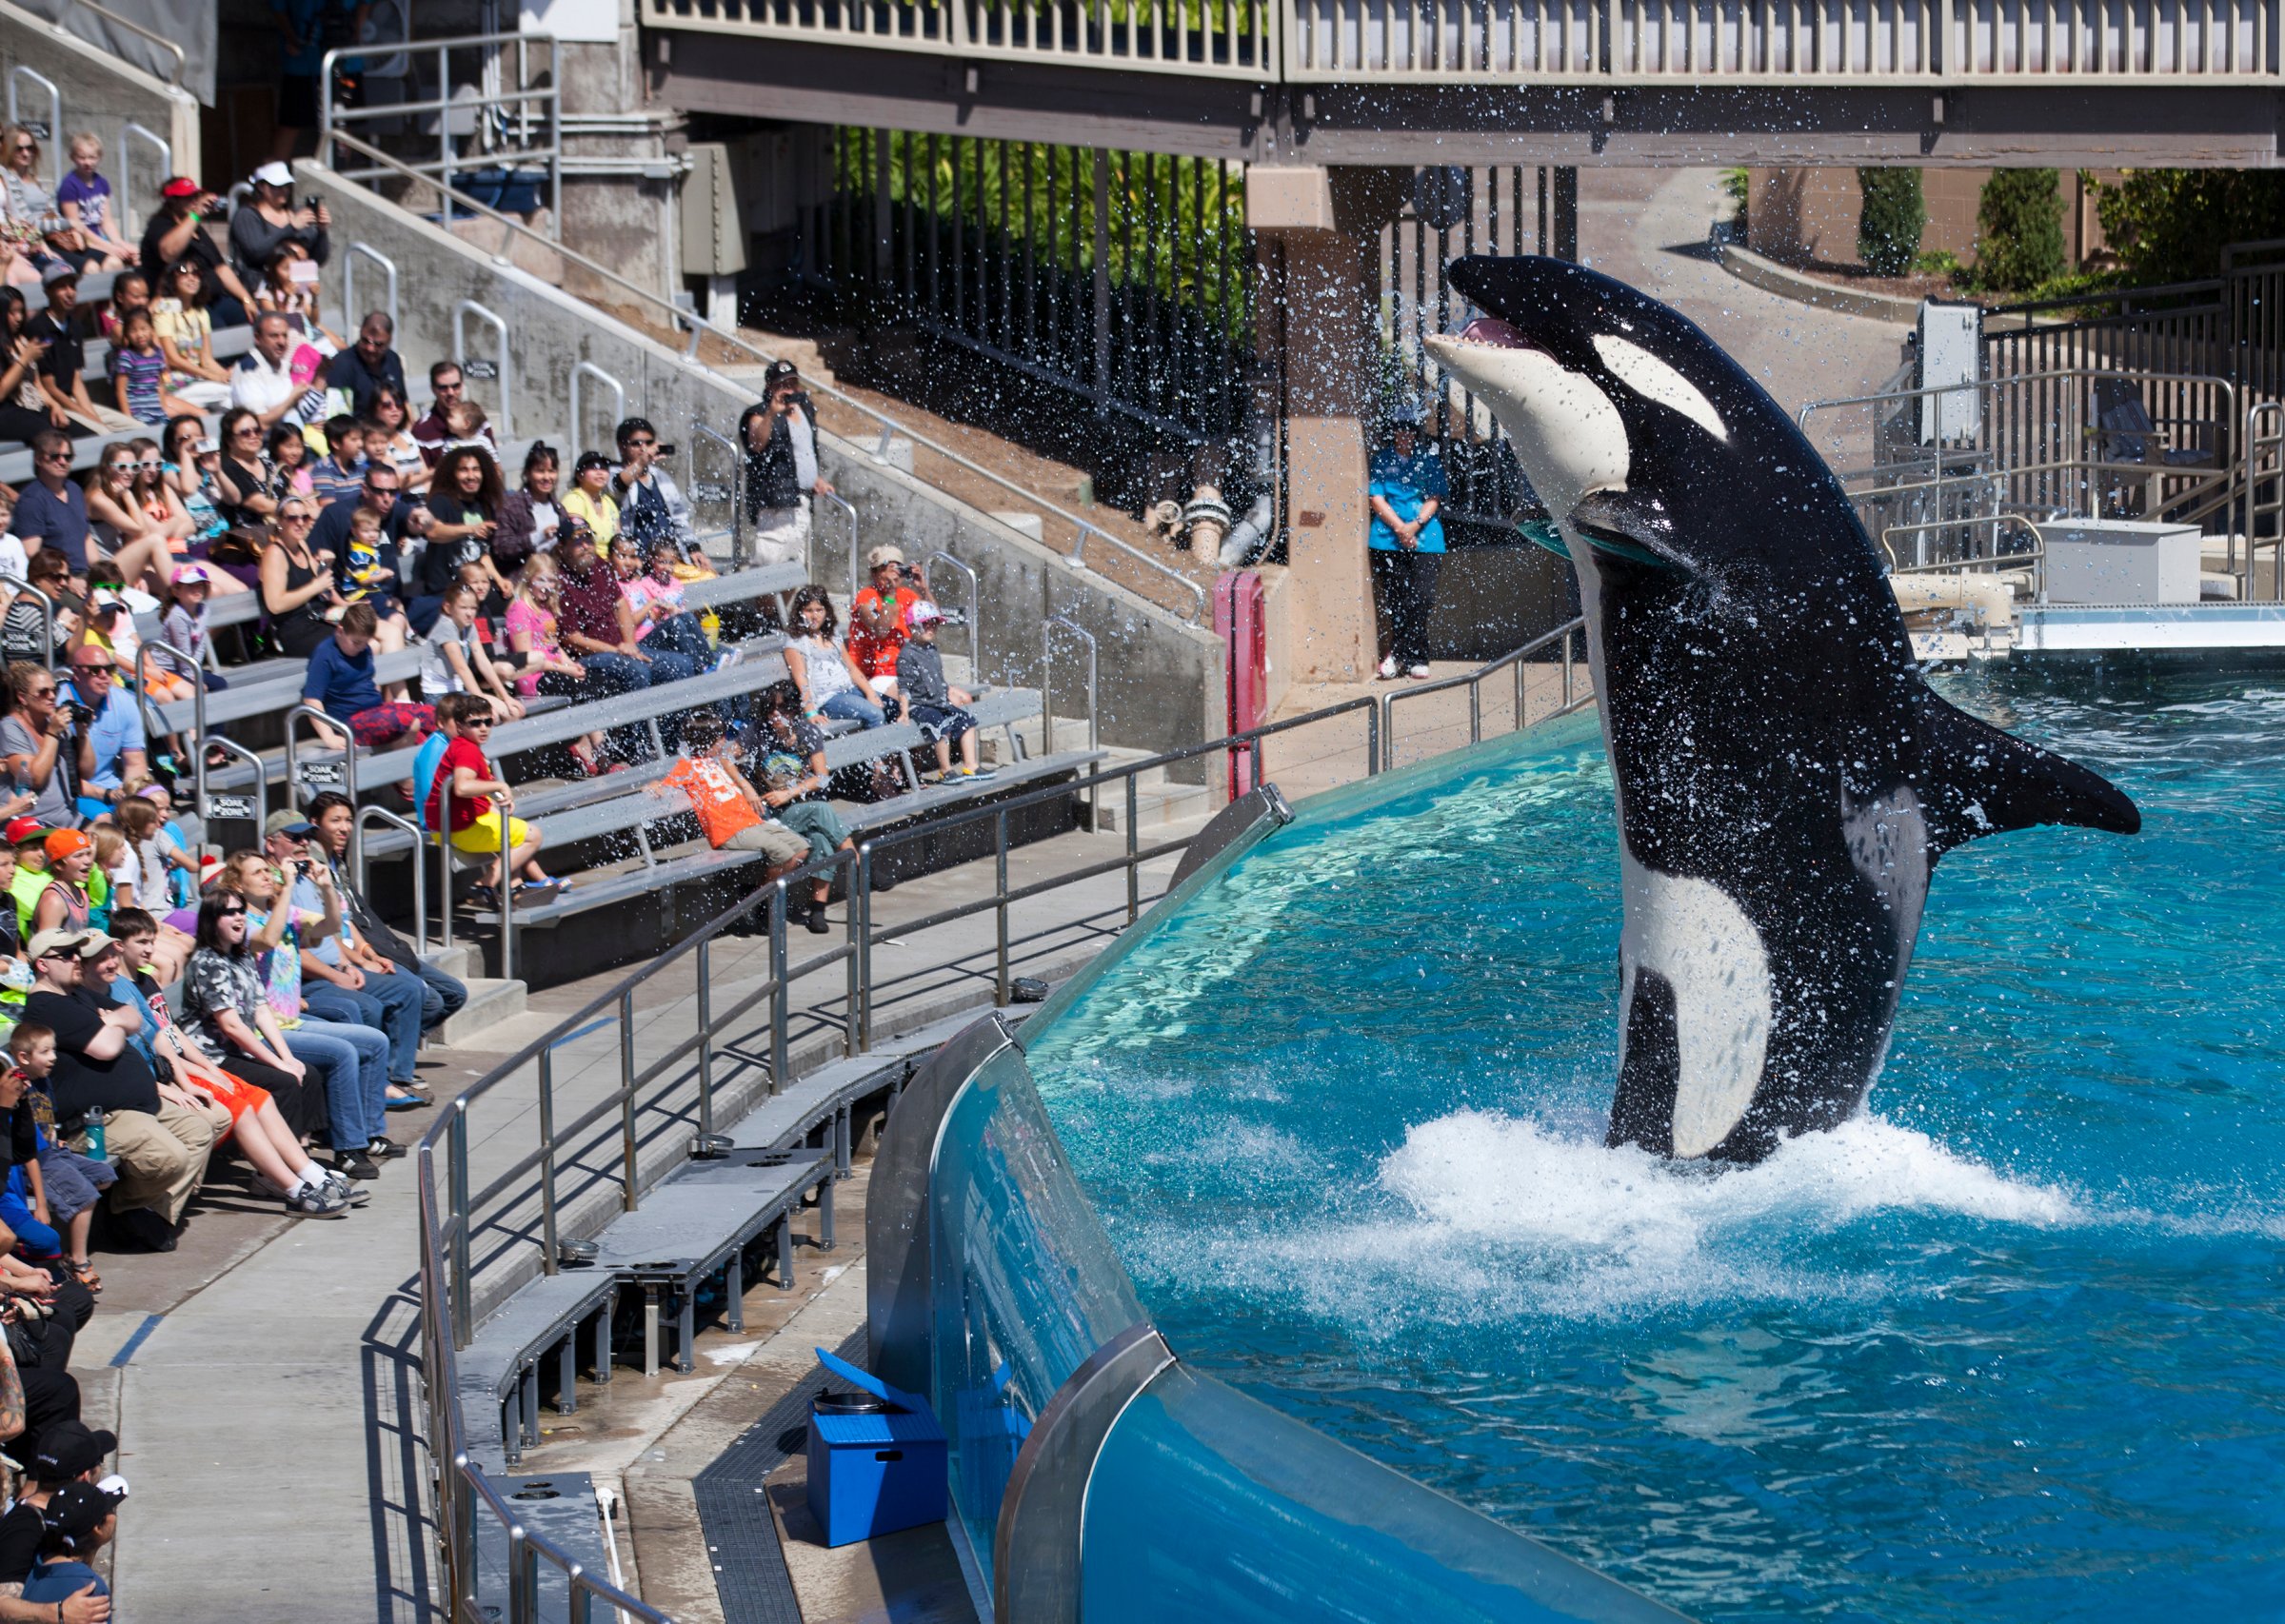 An Orca killer whale performs during a show at the animal theme park SeaWorld in San Diego on March 19, 2014.